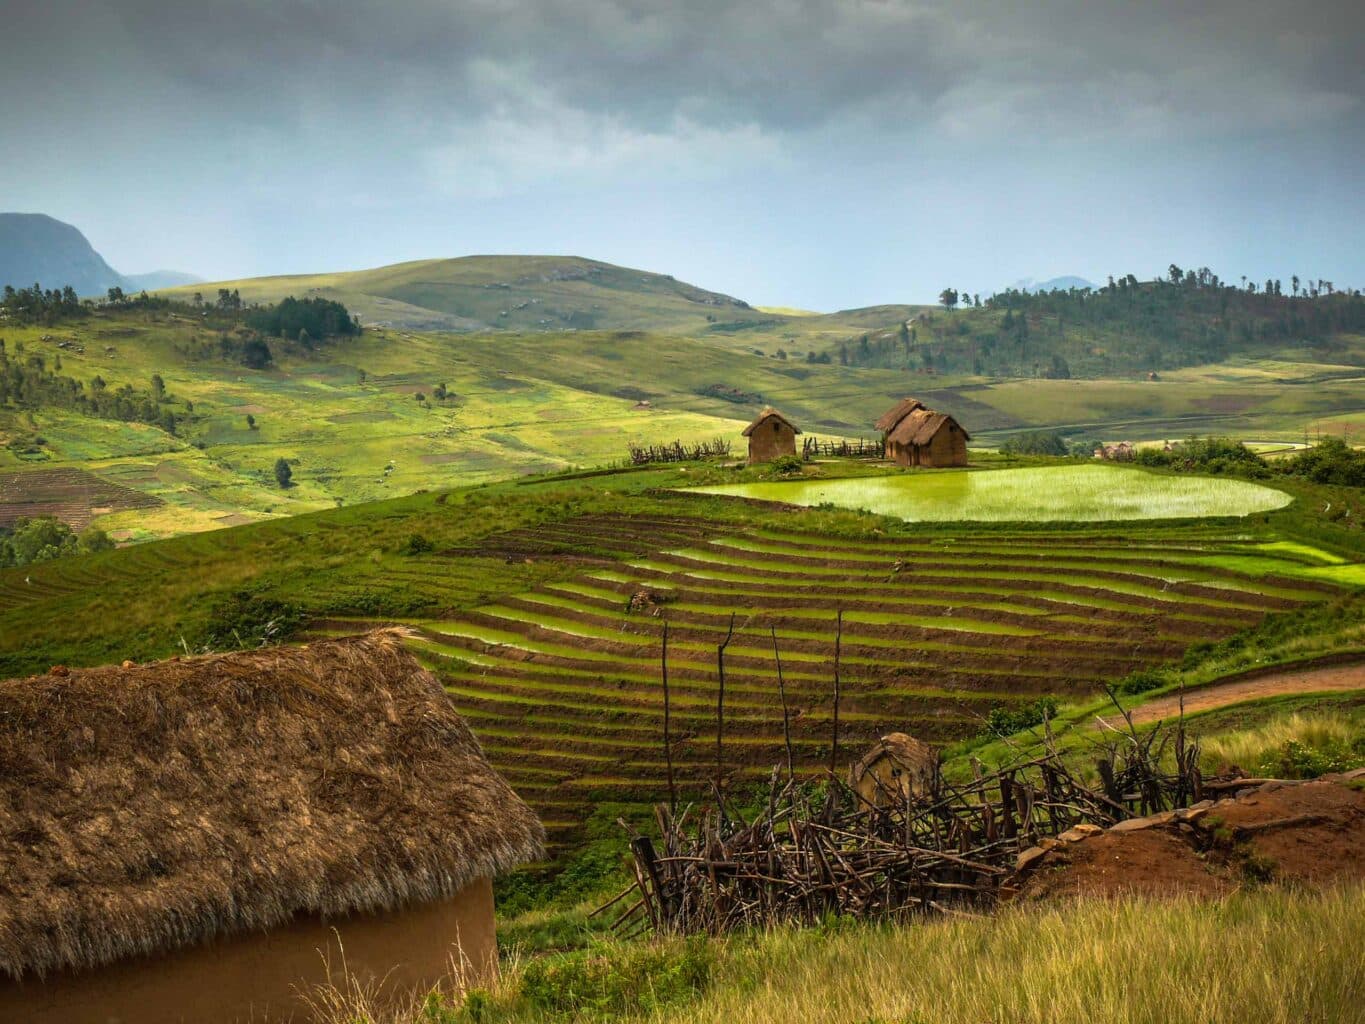 Traditional mud houses and rice paddy in Madagascar.